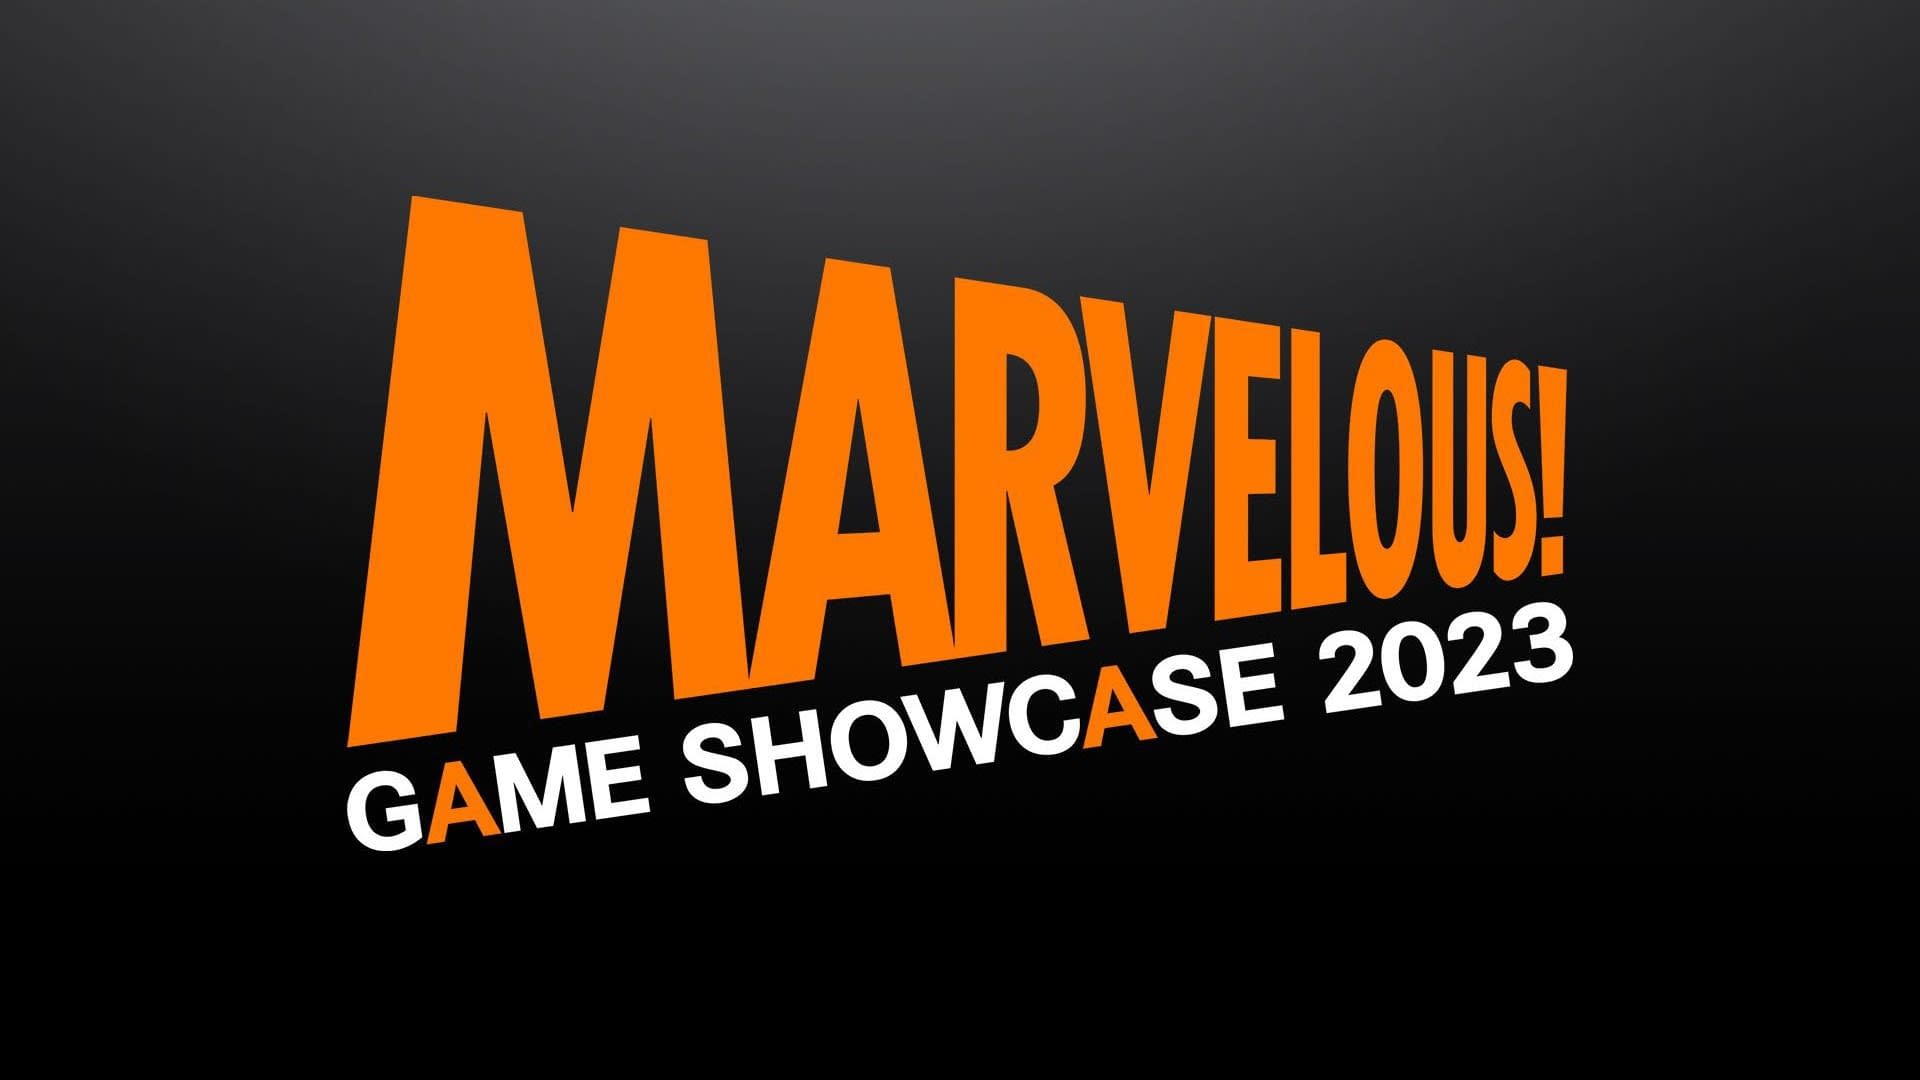 No More Heroes developer will hear new games with Marvelus digital event!